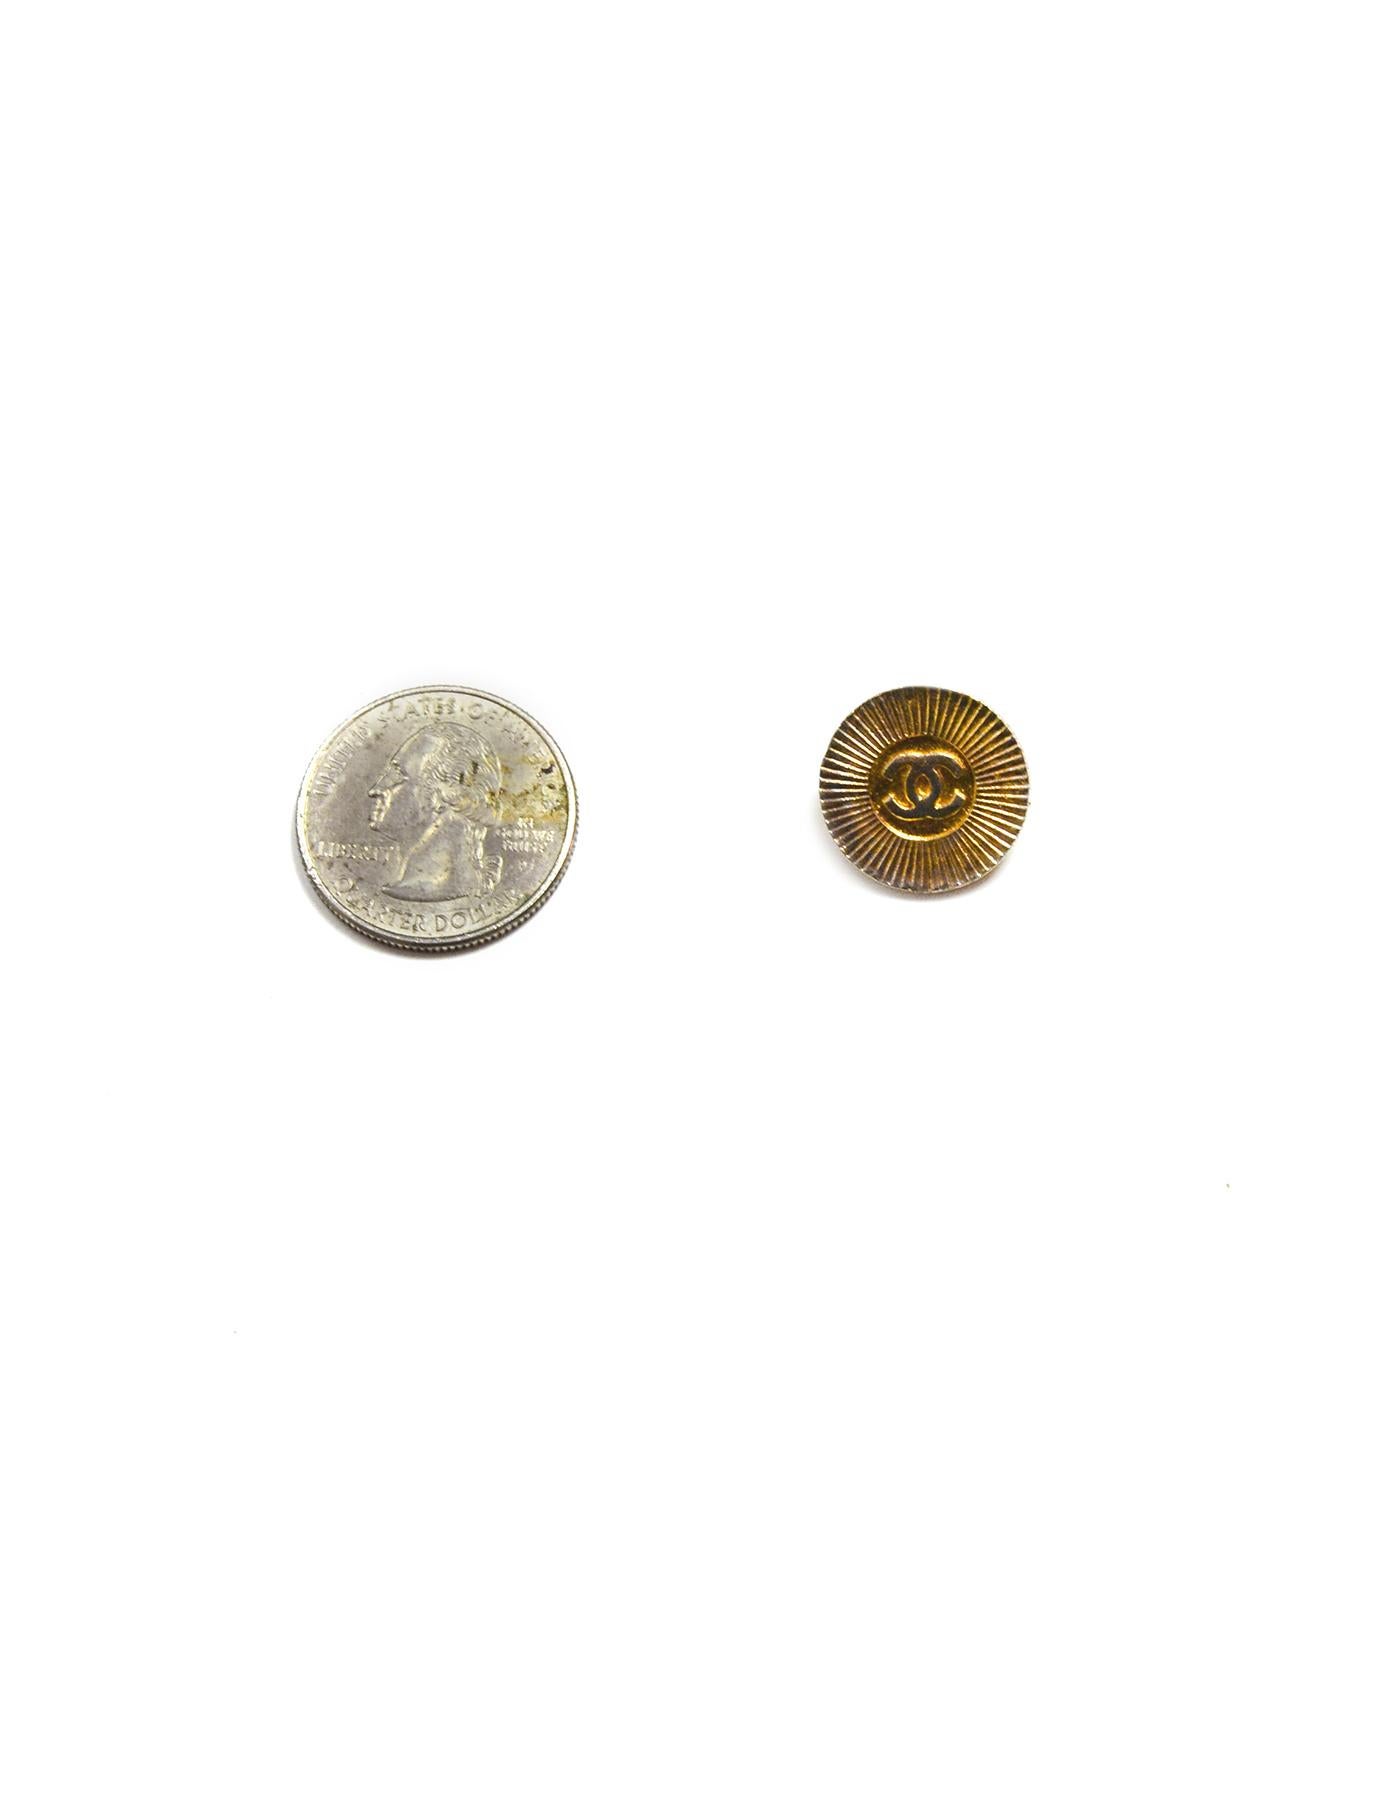 Brown Chanel Goldtone CC Shank Buttons (Set of 7- 3 Small, 2 Medium, 2 Large)